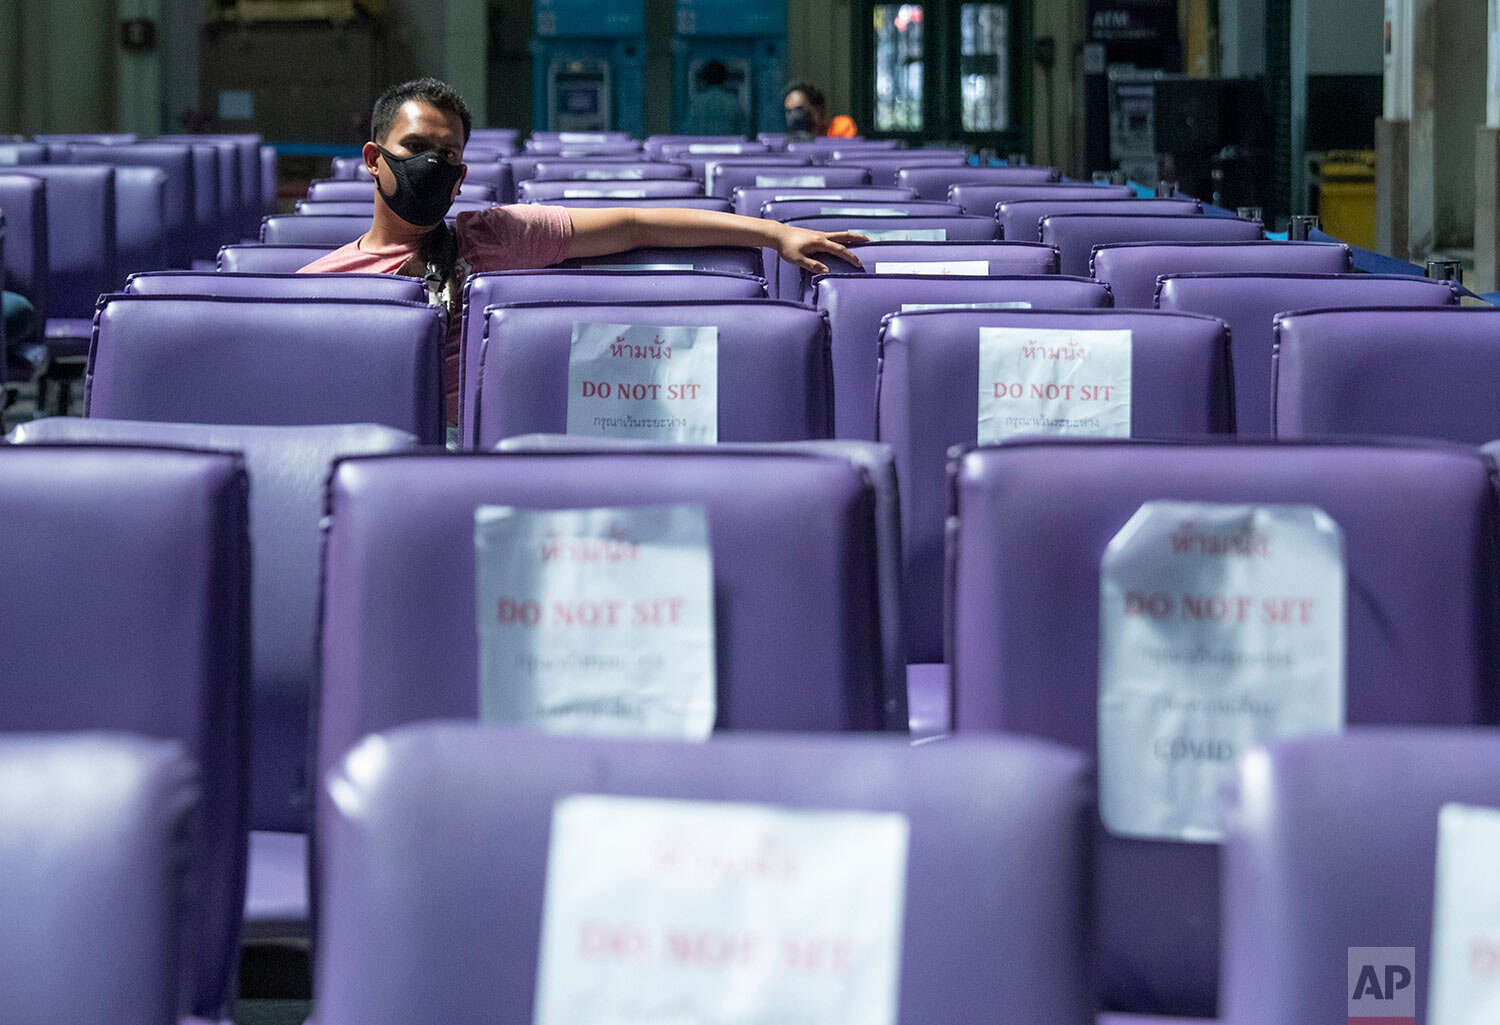  Passengers practice social distancing in the waiting room in hopes of preventing the spread of the coronavirus at the Hua Lamphong Railway Station in Bangkok, Thailand, Monday, March 23, 2020. (AP Photo/Sakchai Lalit) 